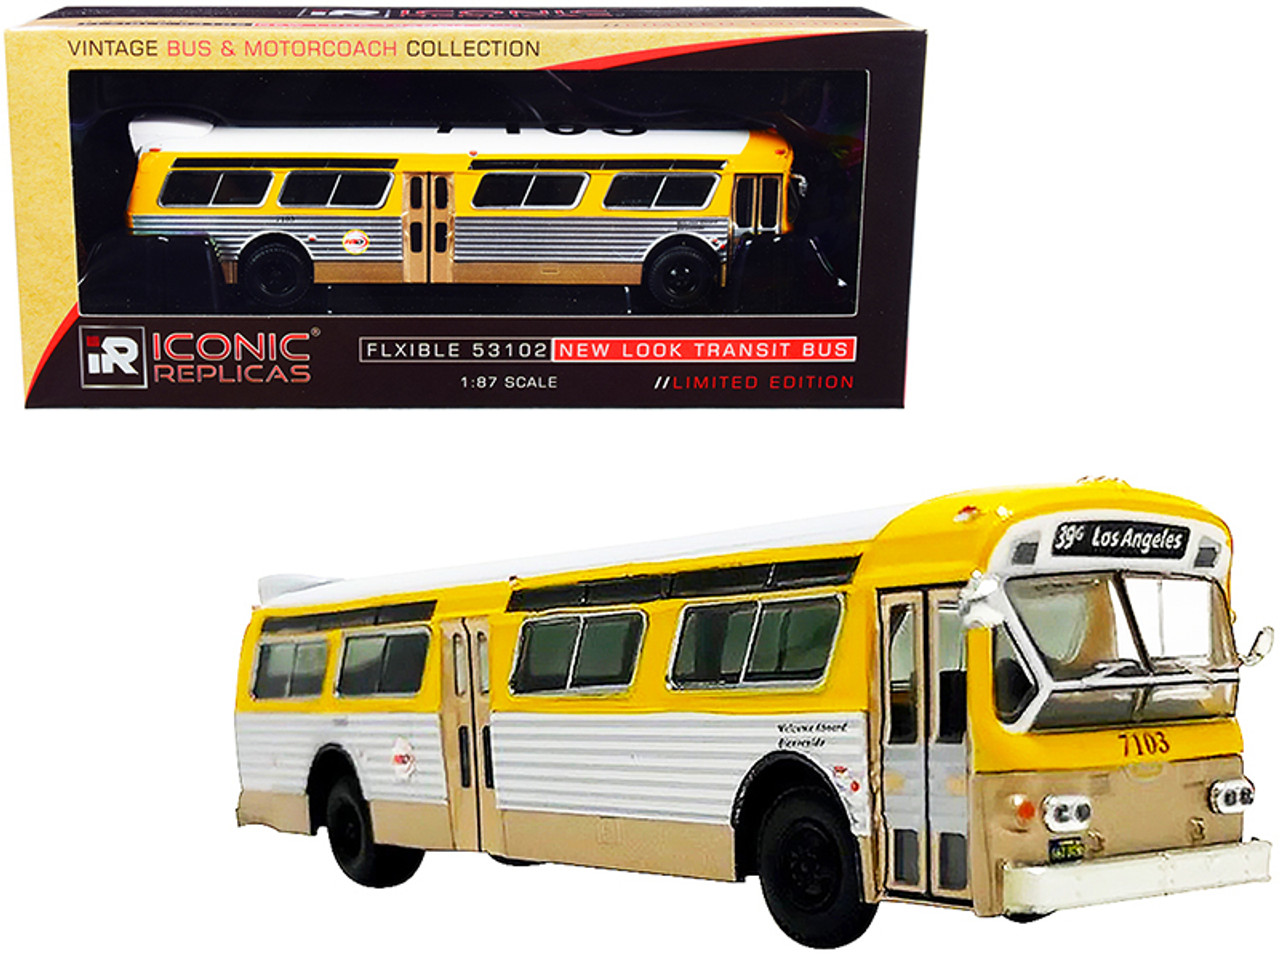 Flxible 53102 Transit Bus "RTA" (Los Angeles California) Yellow and Silver with White Top "Vintage Bus & Motorcoach Collection" 1/87 Diecast Model by Iconic Replicas